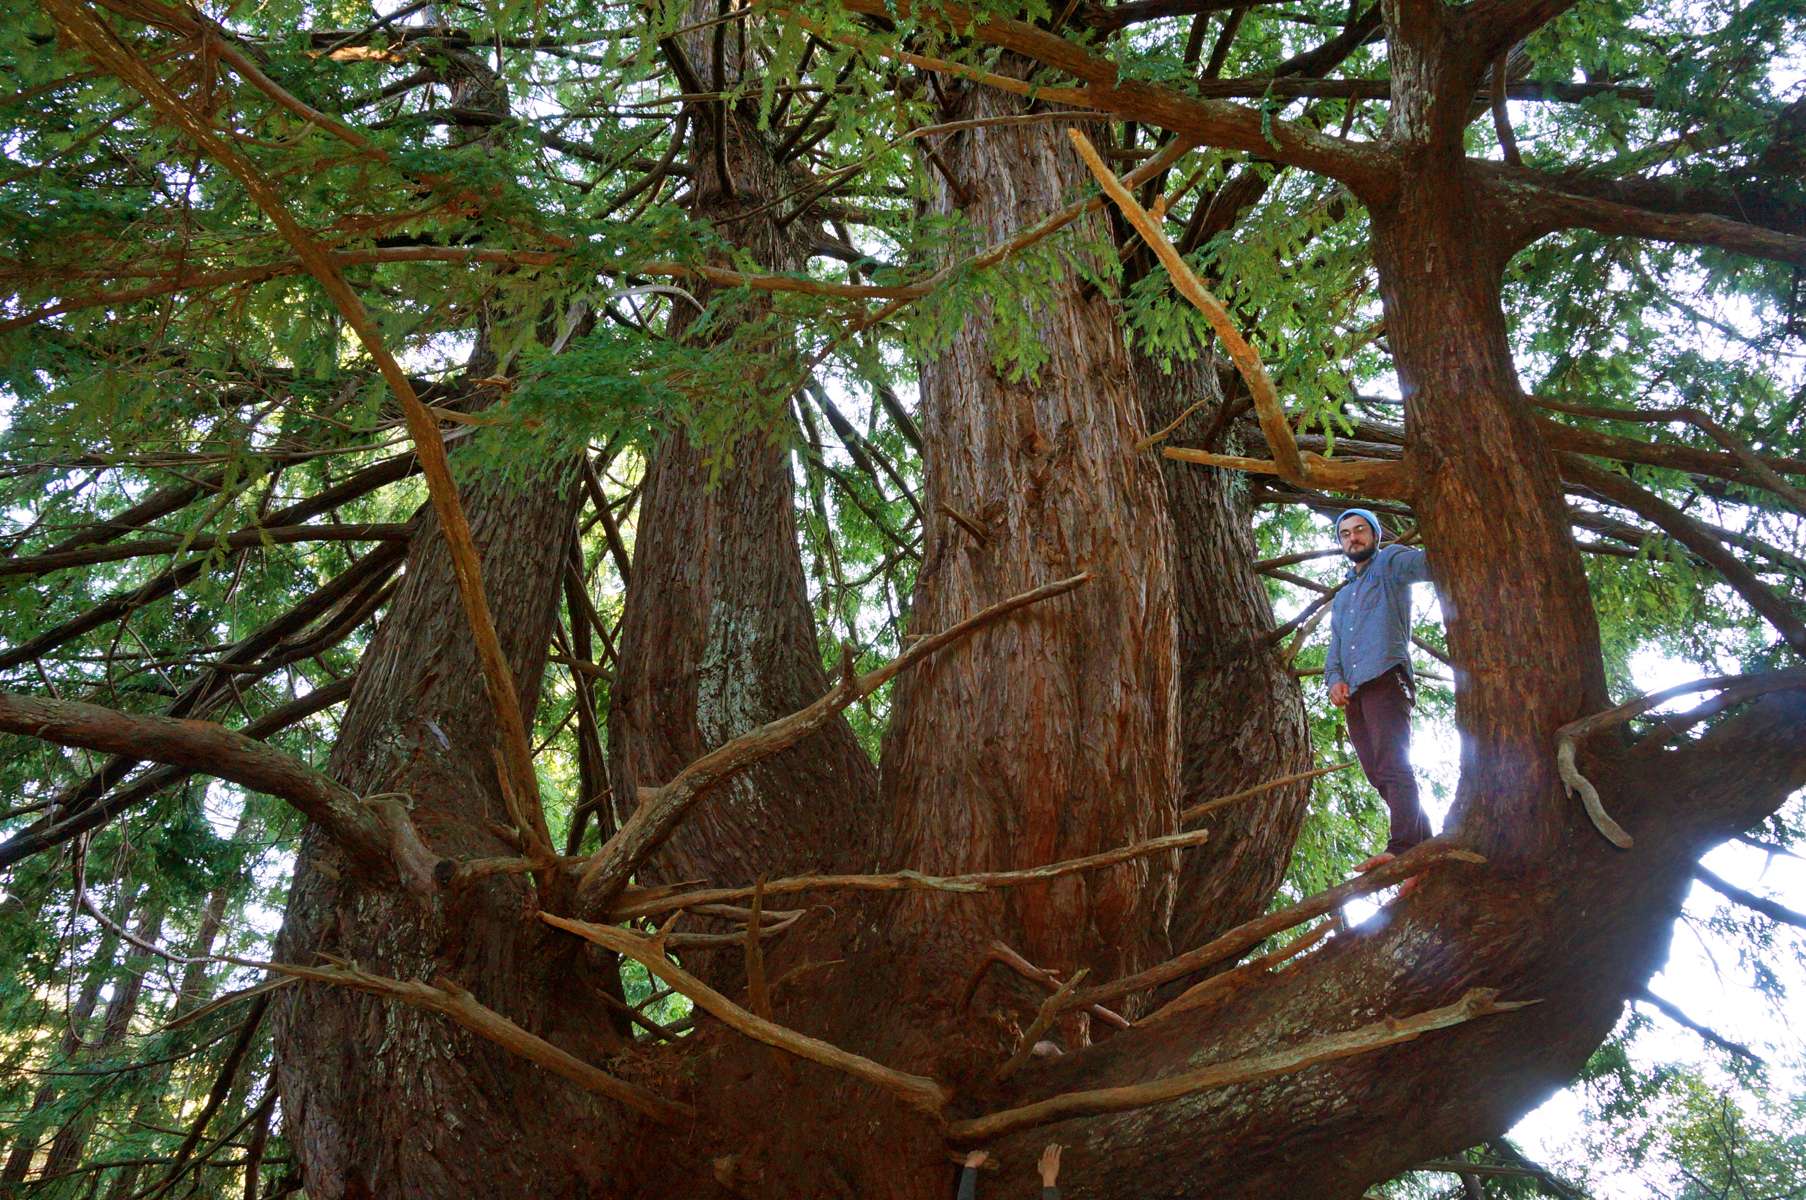 Candelabra Tree, Butano Redwoods State Park, Nothern Caifornia